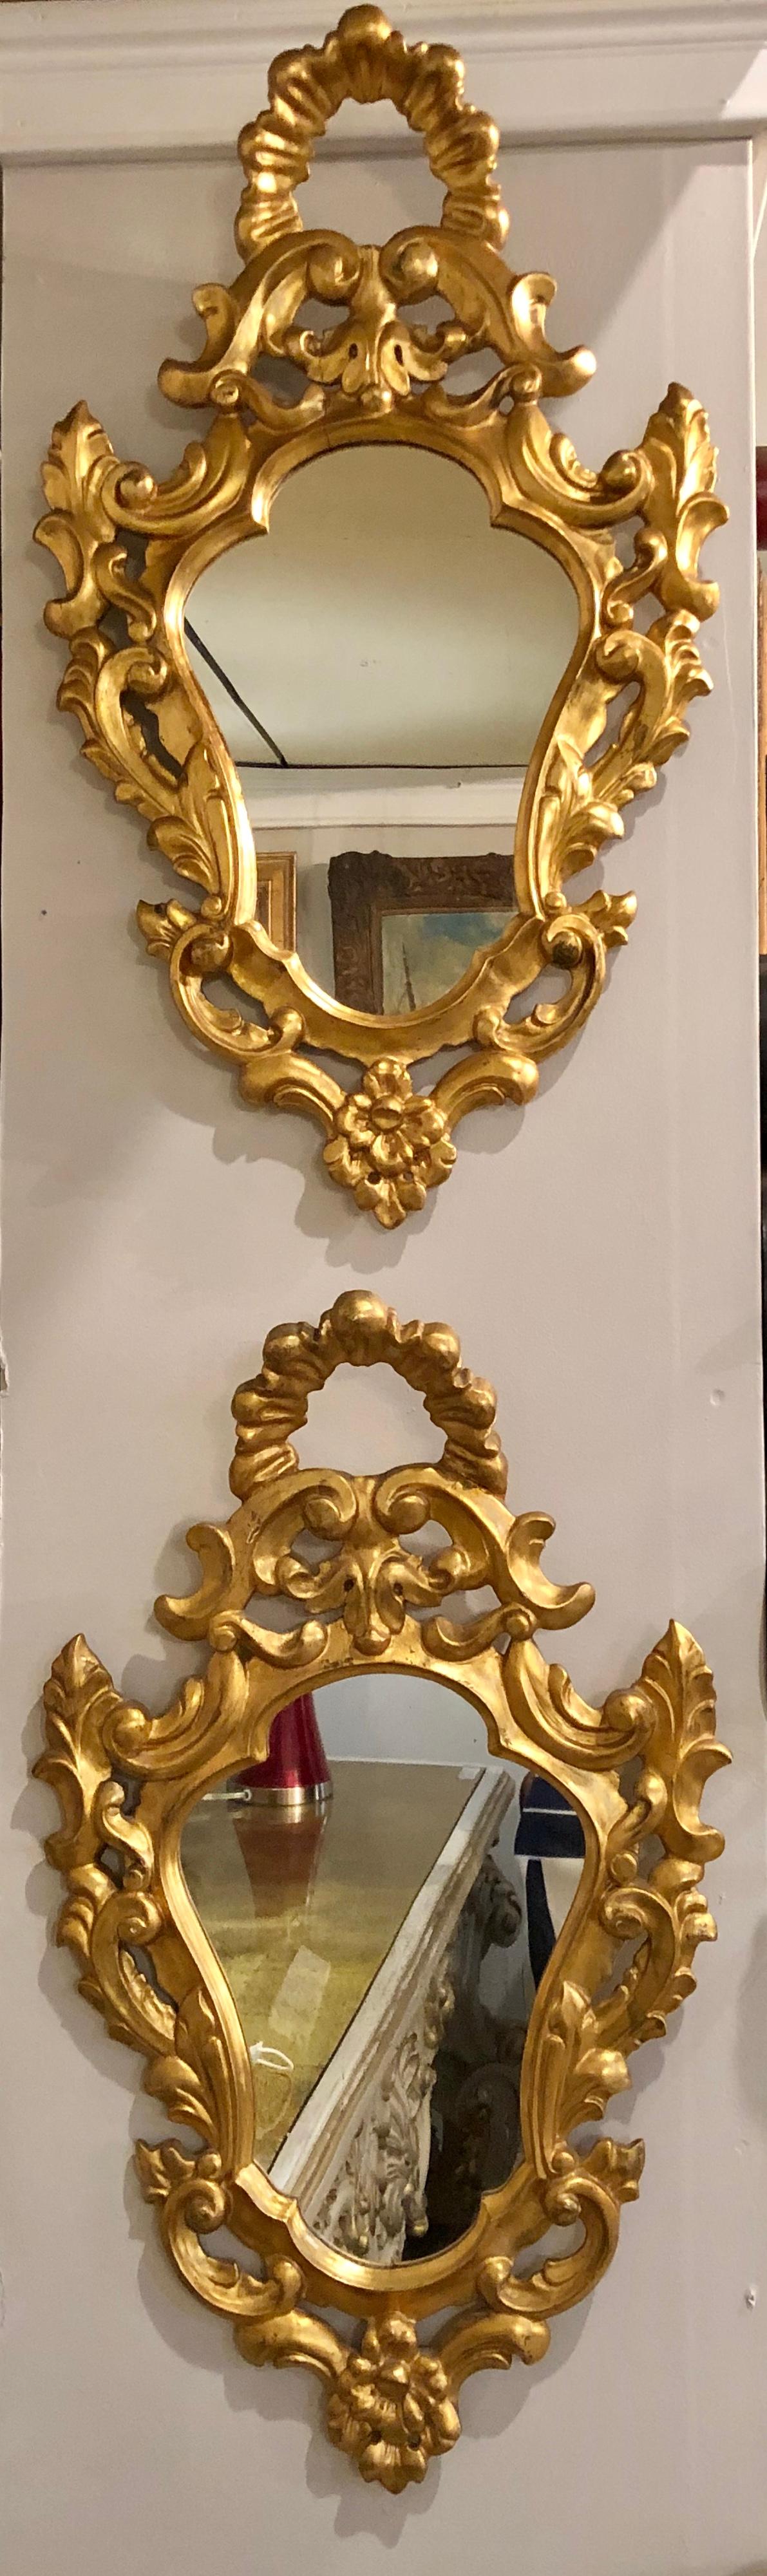 Pair of Italian Rococo Wall Mirrors, Giltwood Carved 1